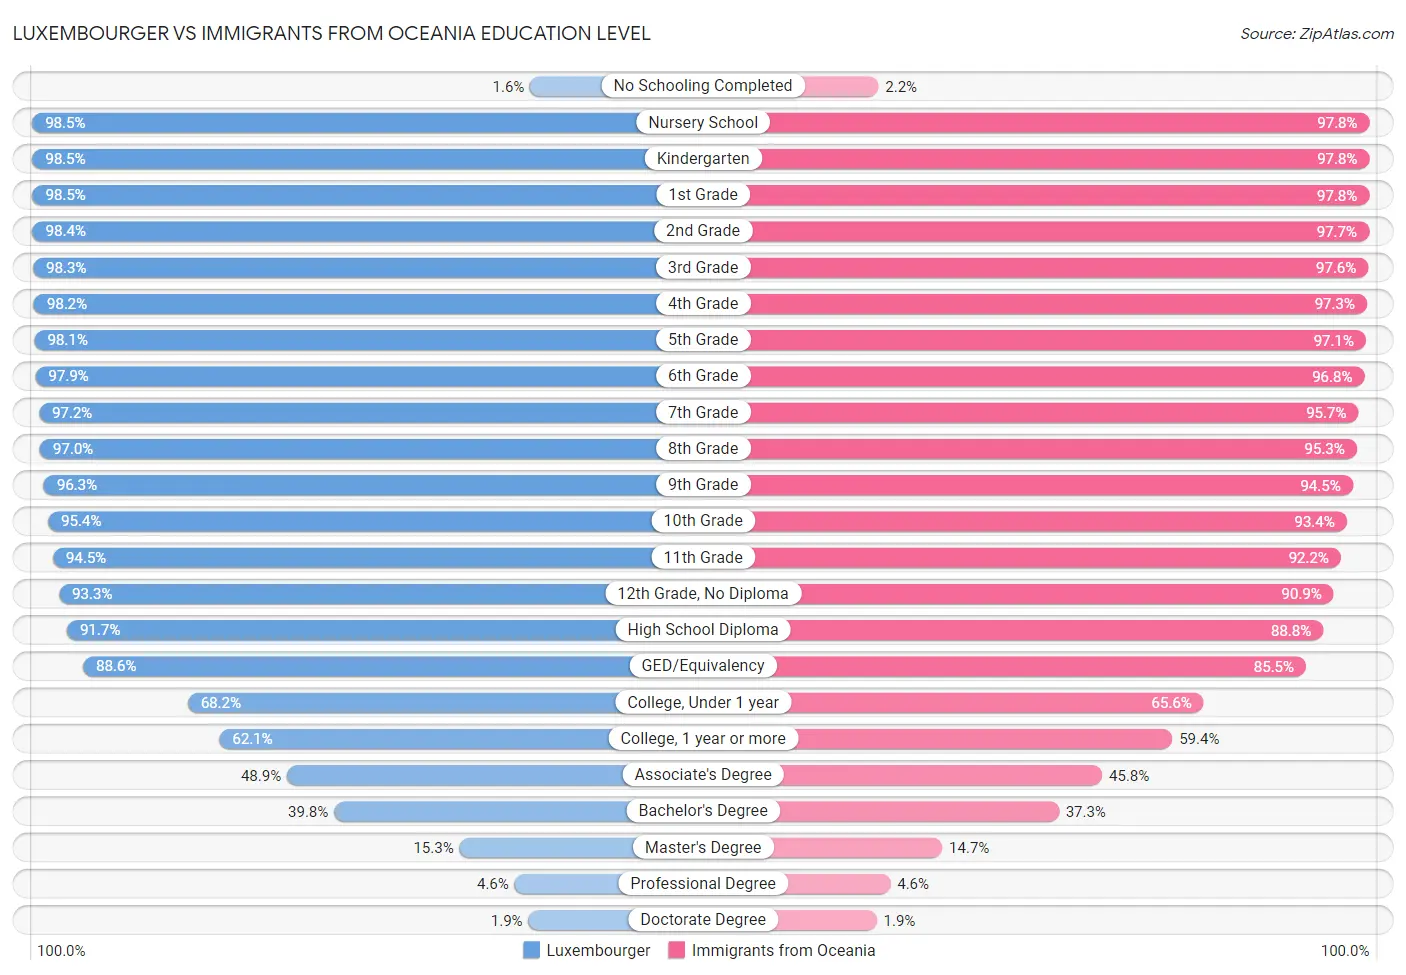 Luxembourger vs Immigrants from Oceania Education Level